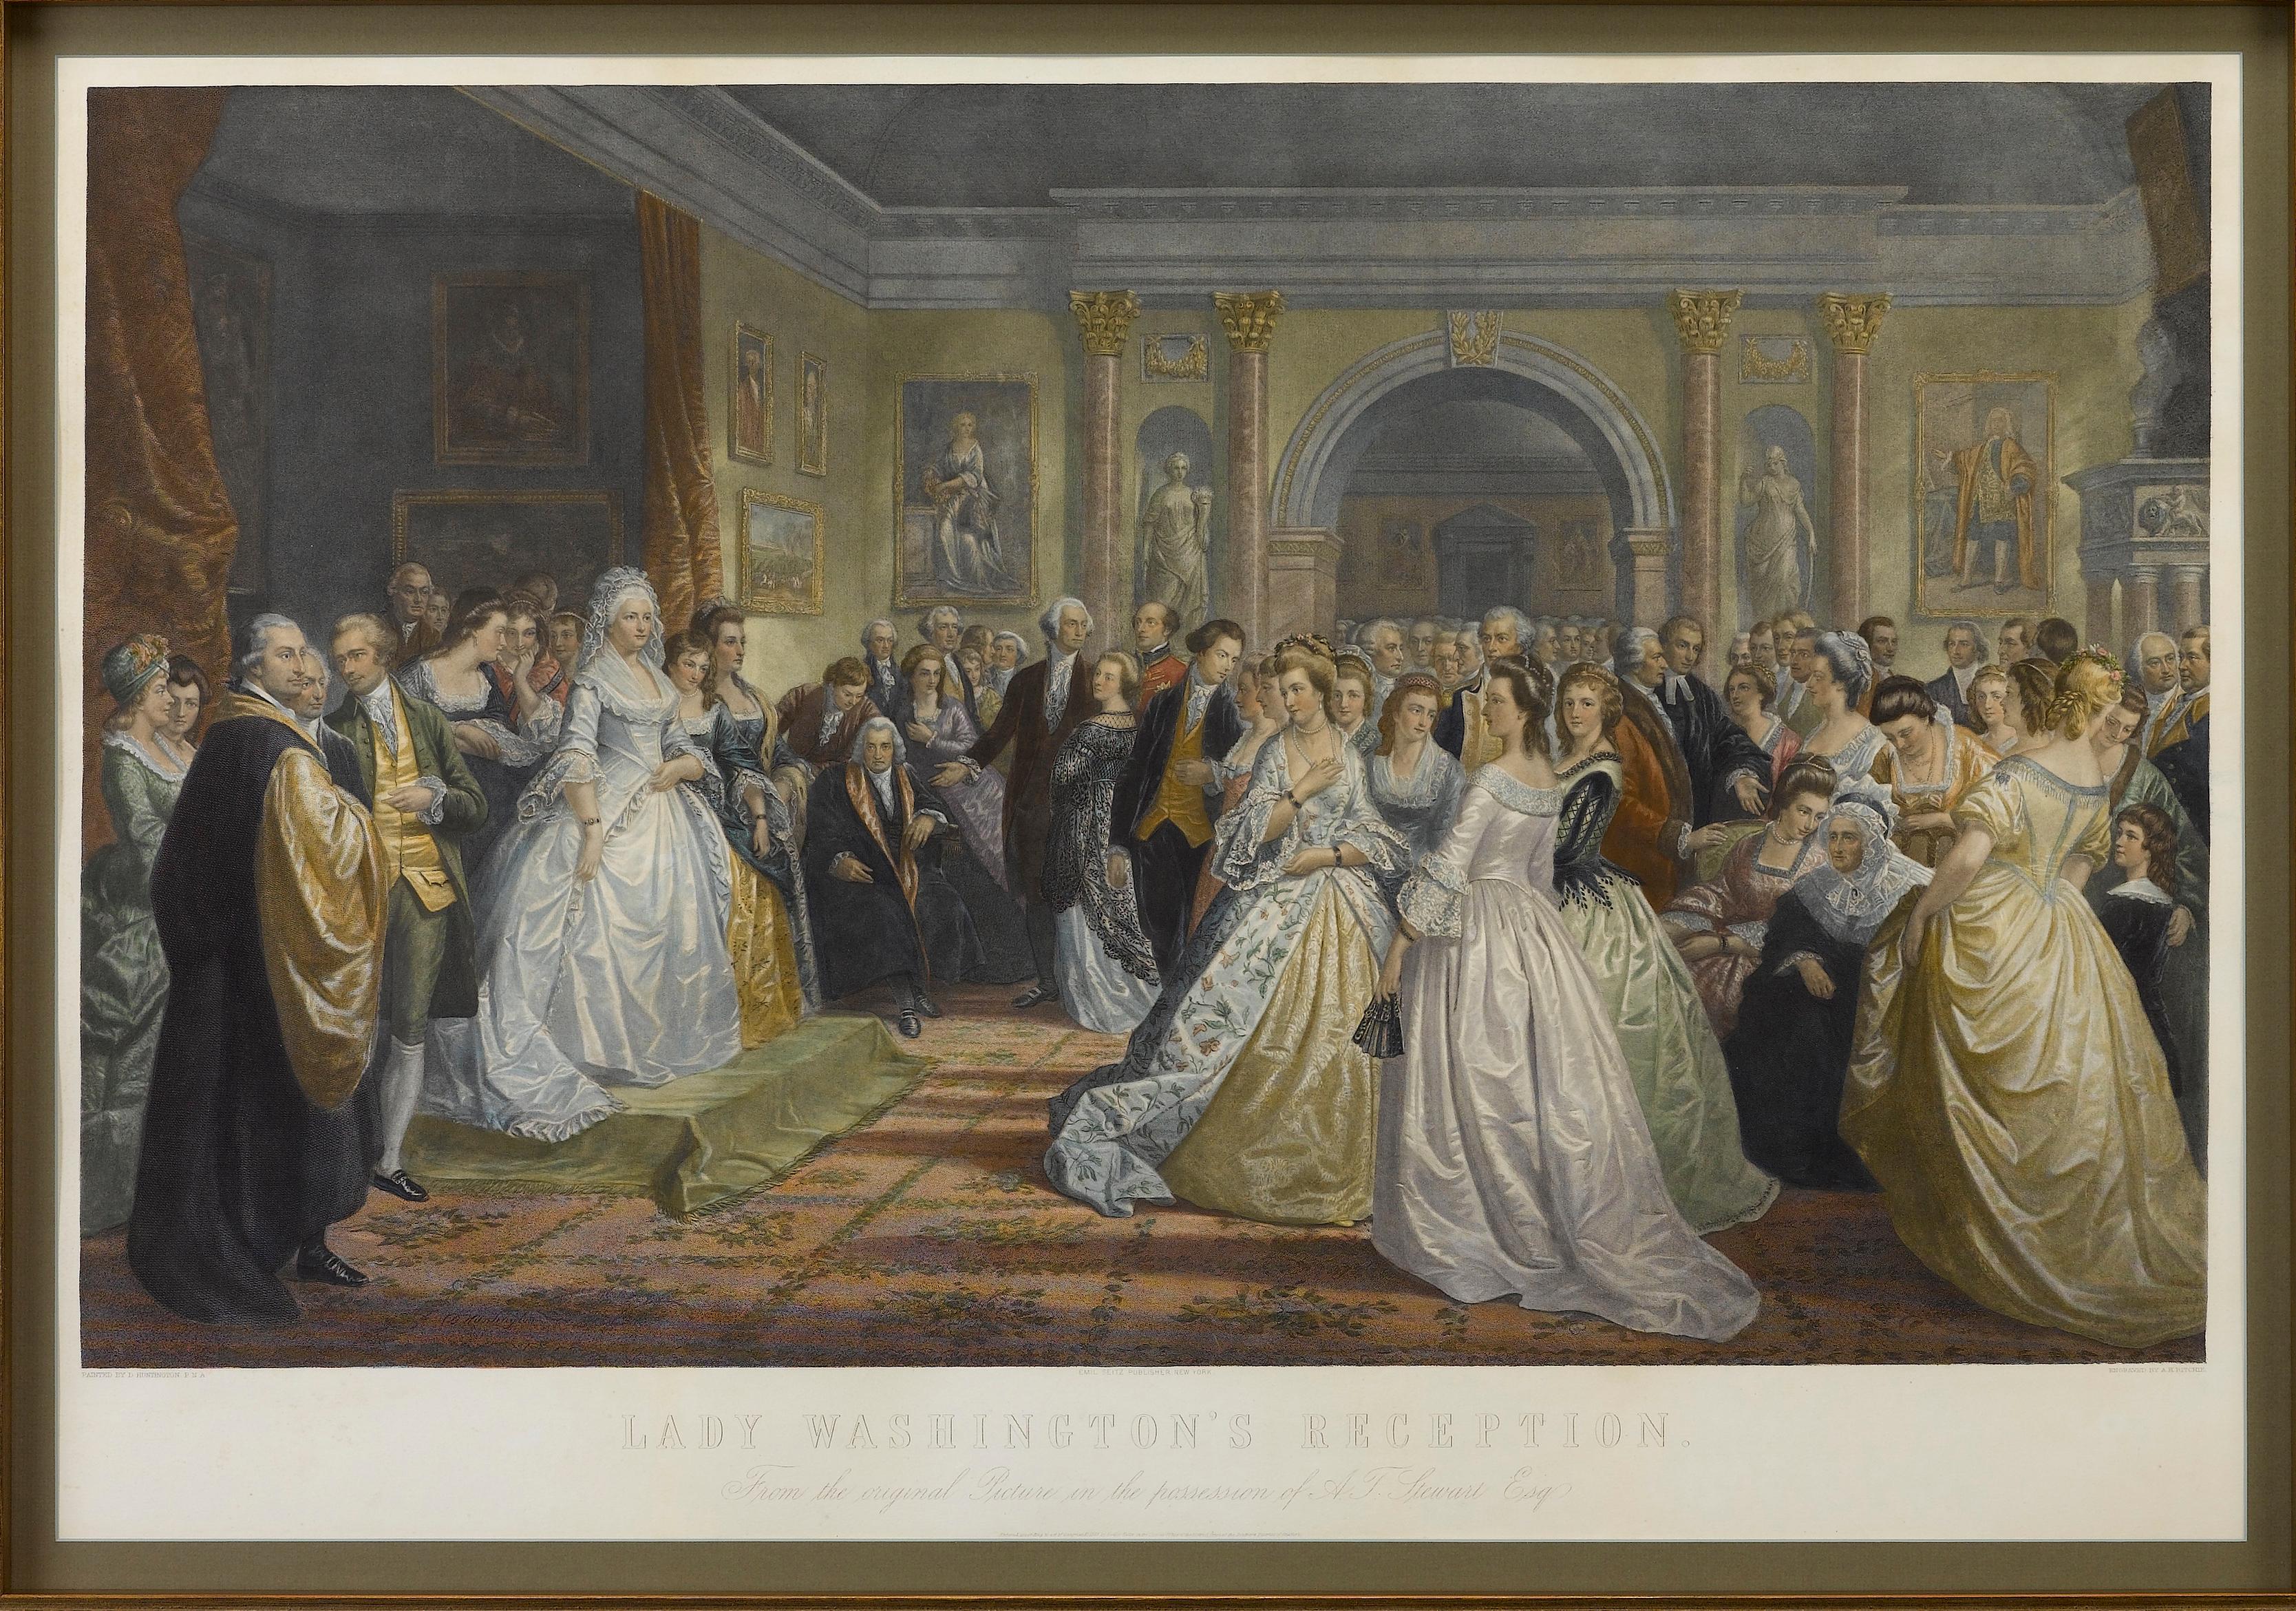 This 1865, hand-colored engraving by A. H. Ritchie is entitled Lady Washington's Reception and is based on Daniel F. Huntington's original painting 